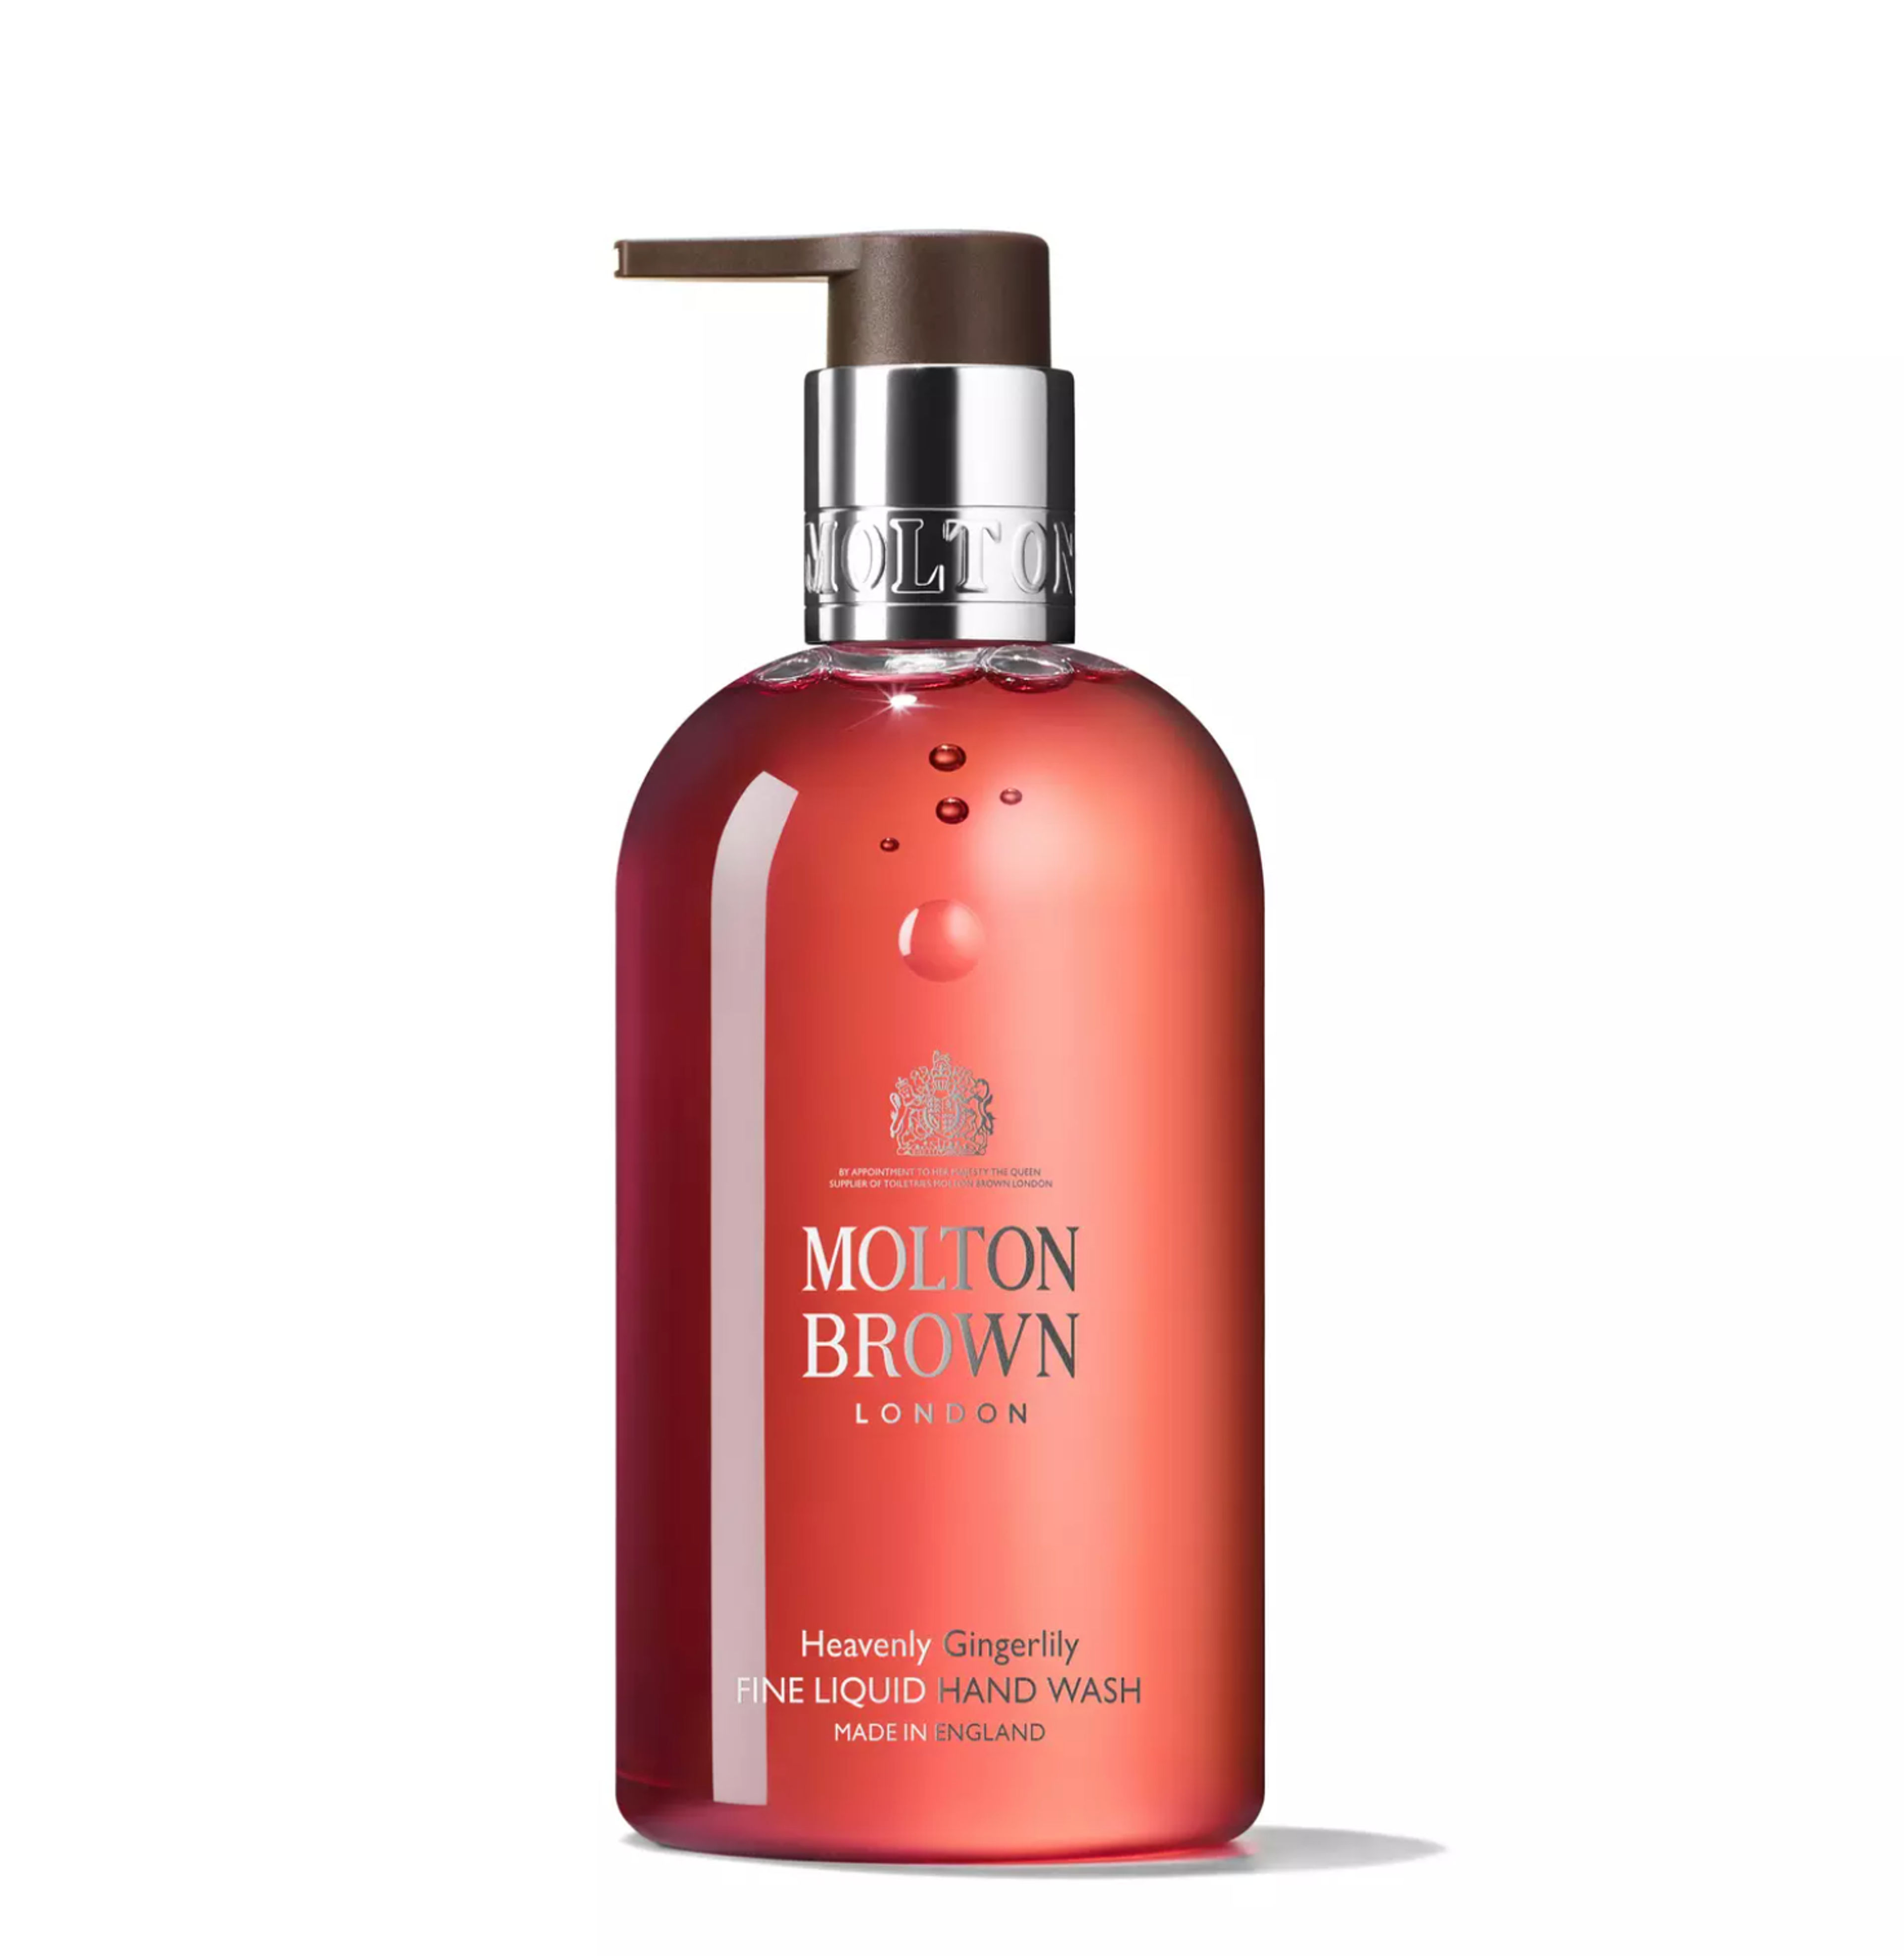  Heavenly Gingerlily Hand Wash 